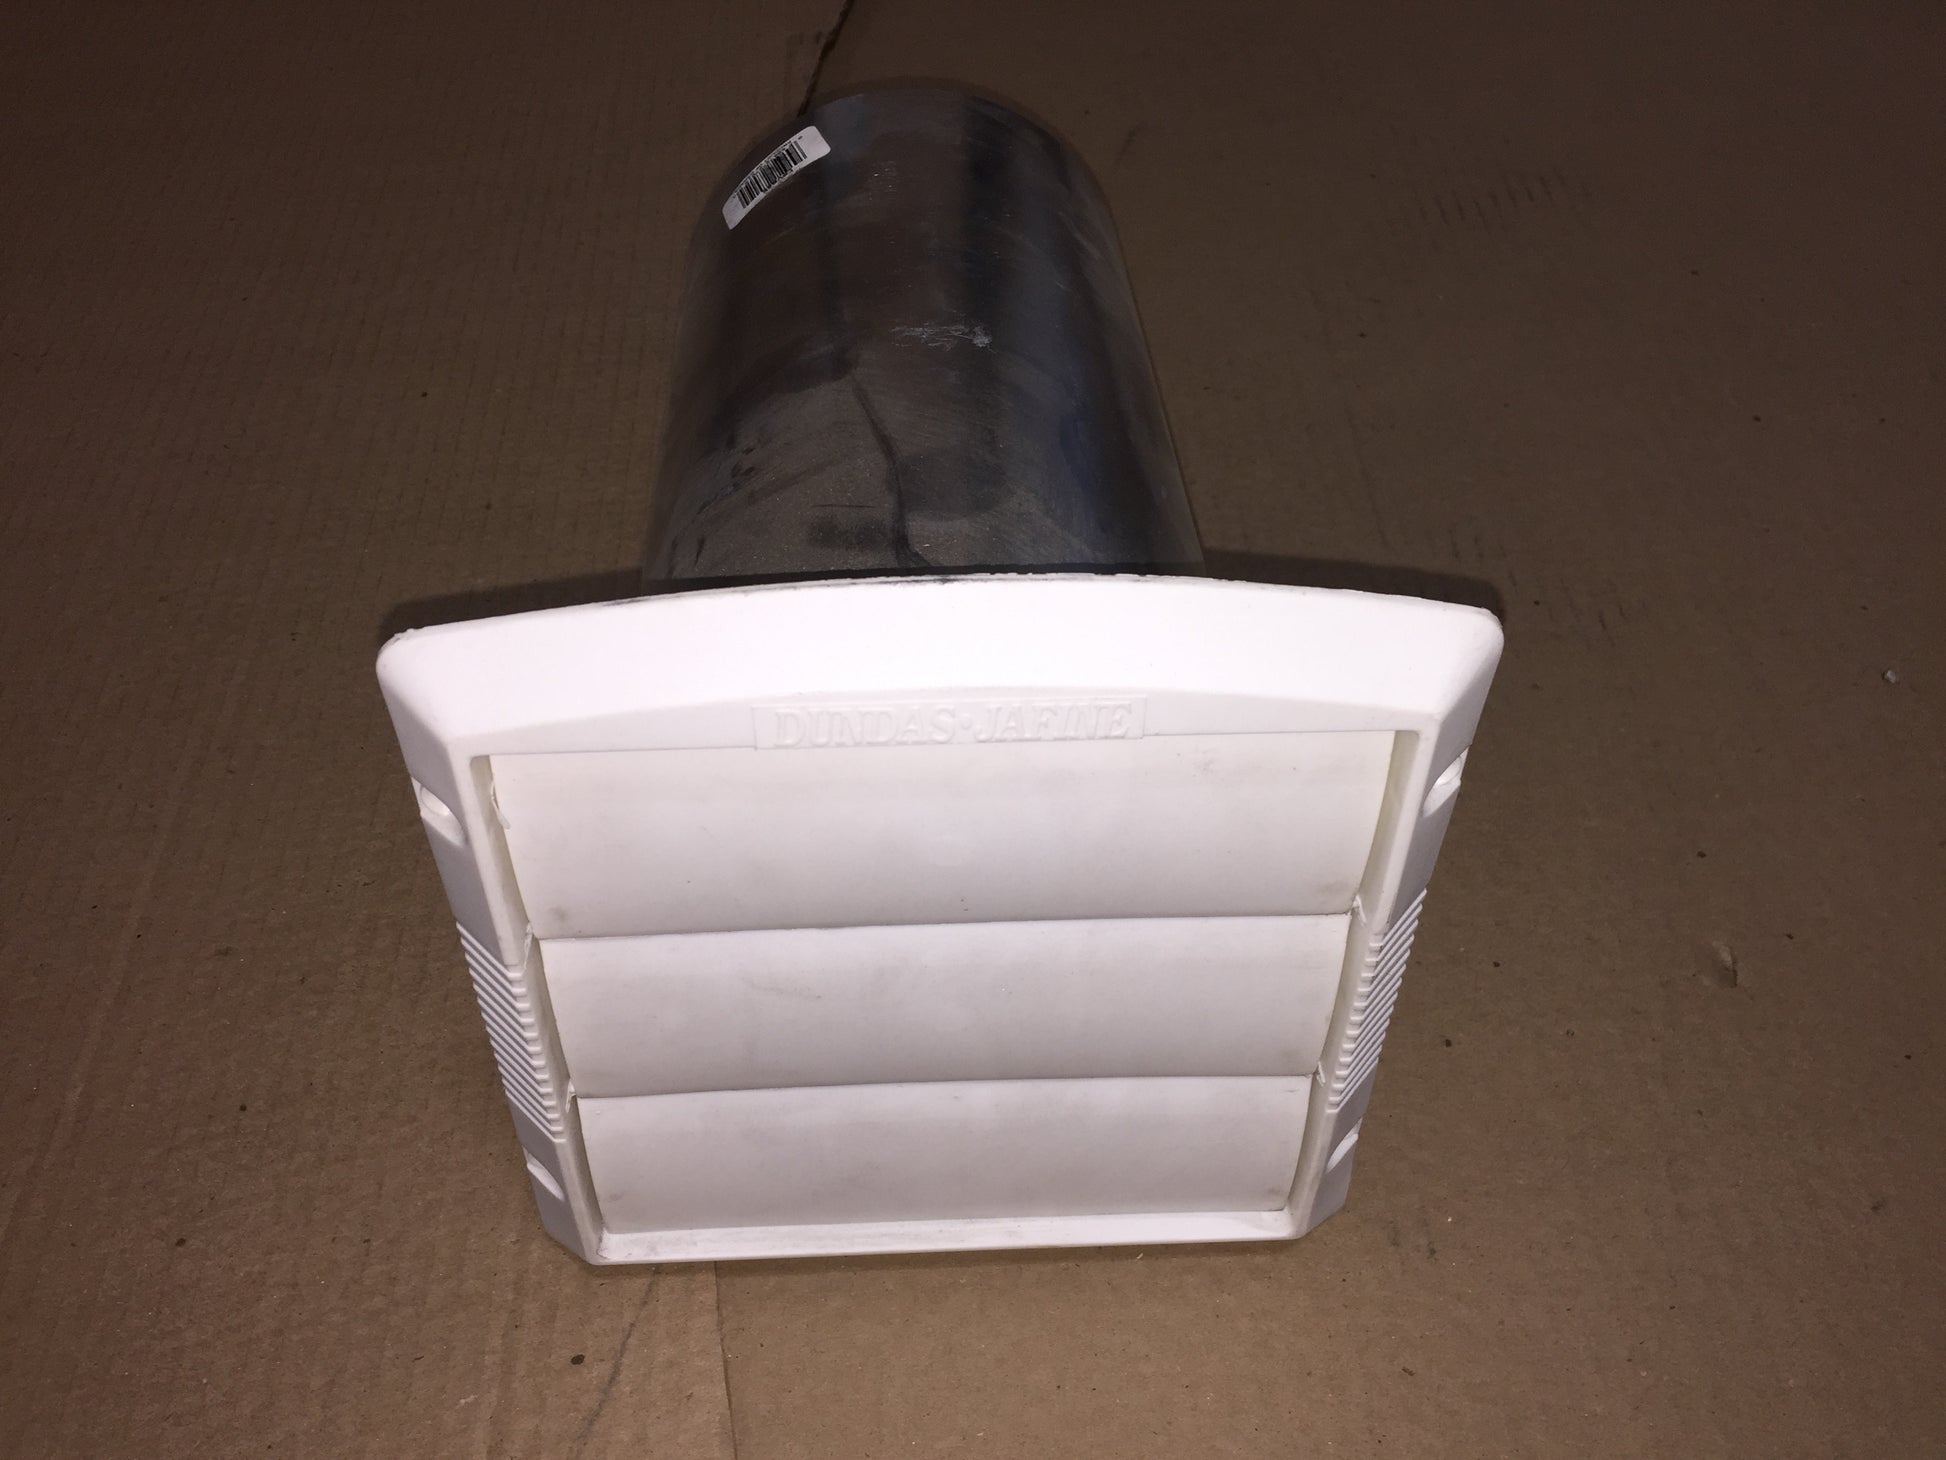 6" SILVER ALUMINUM DRYER VENT HOOD WITH PLASTIC GRILLE